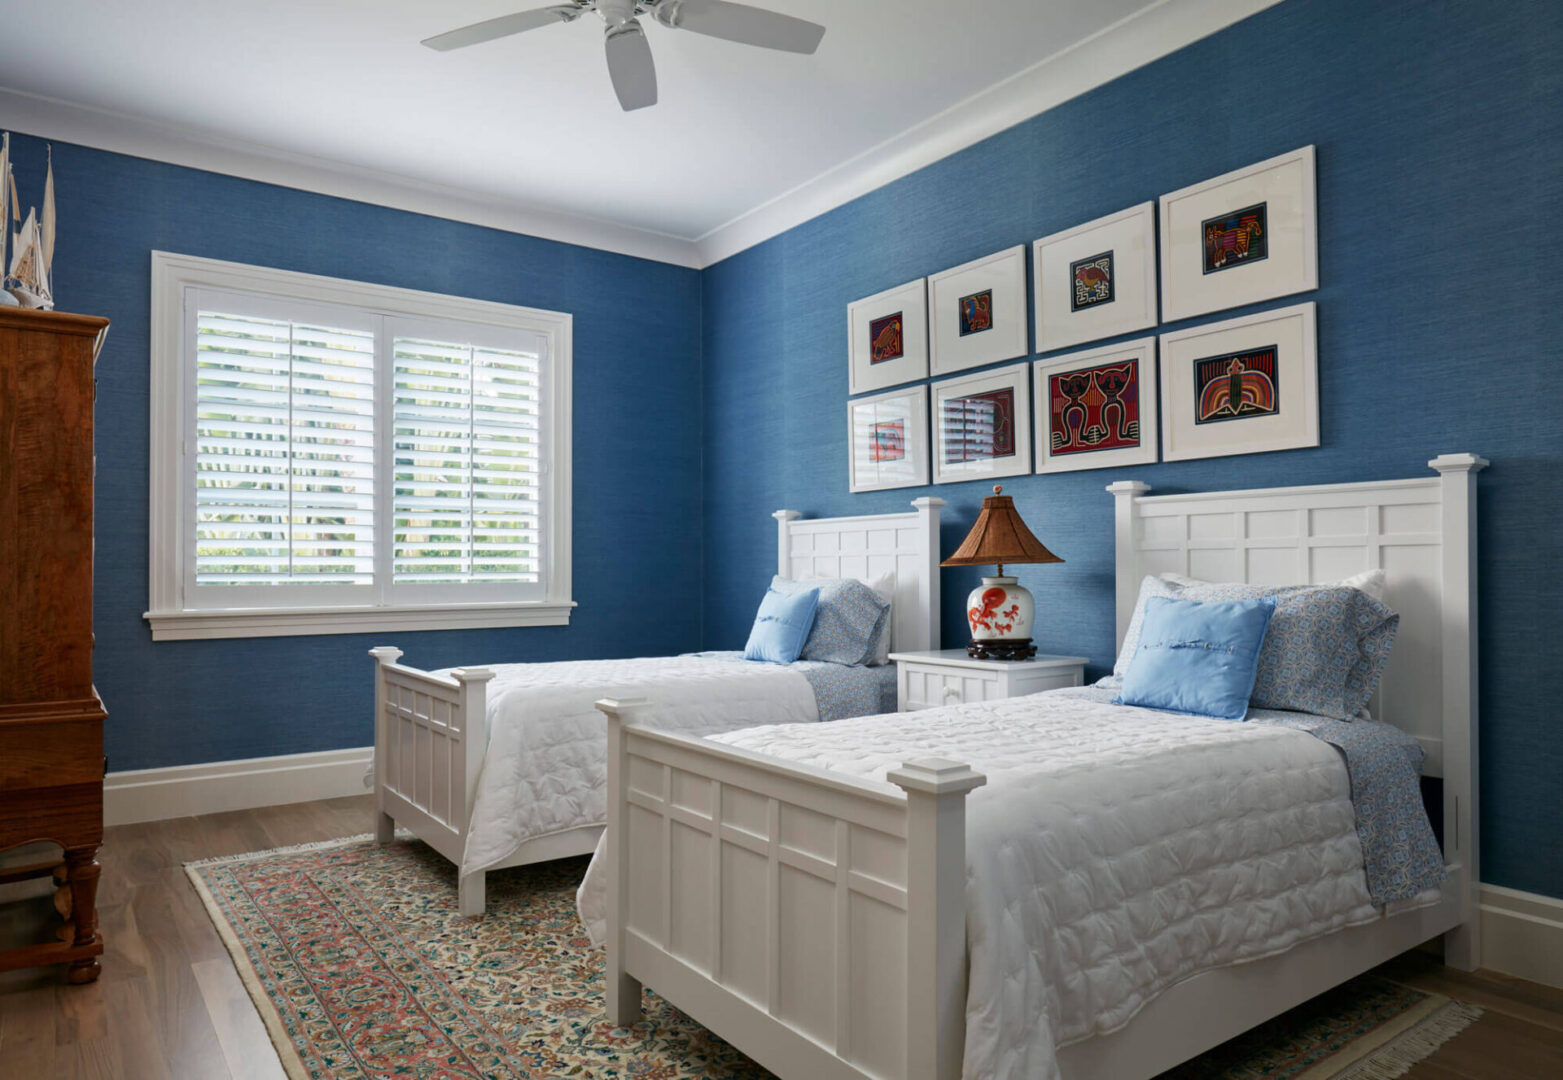 A bedroom with two beds and blue walls